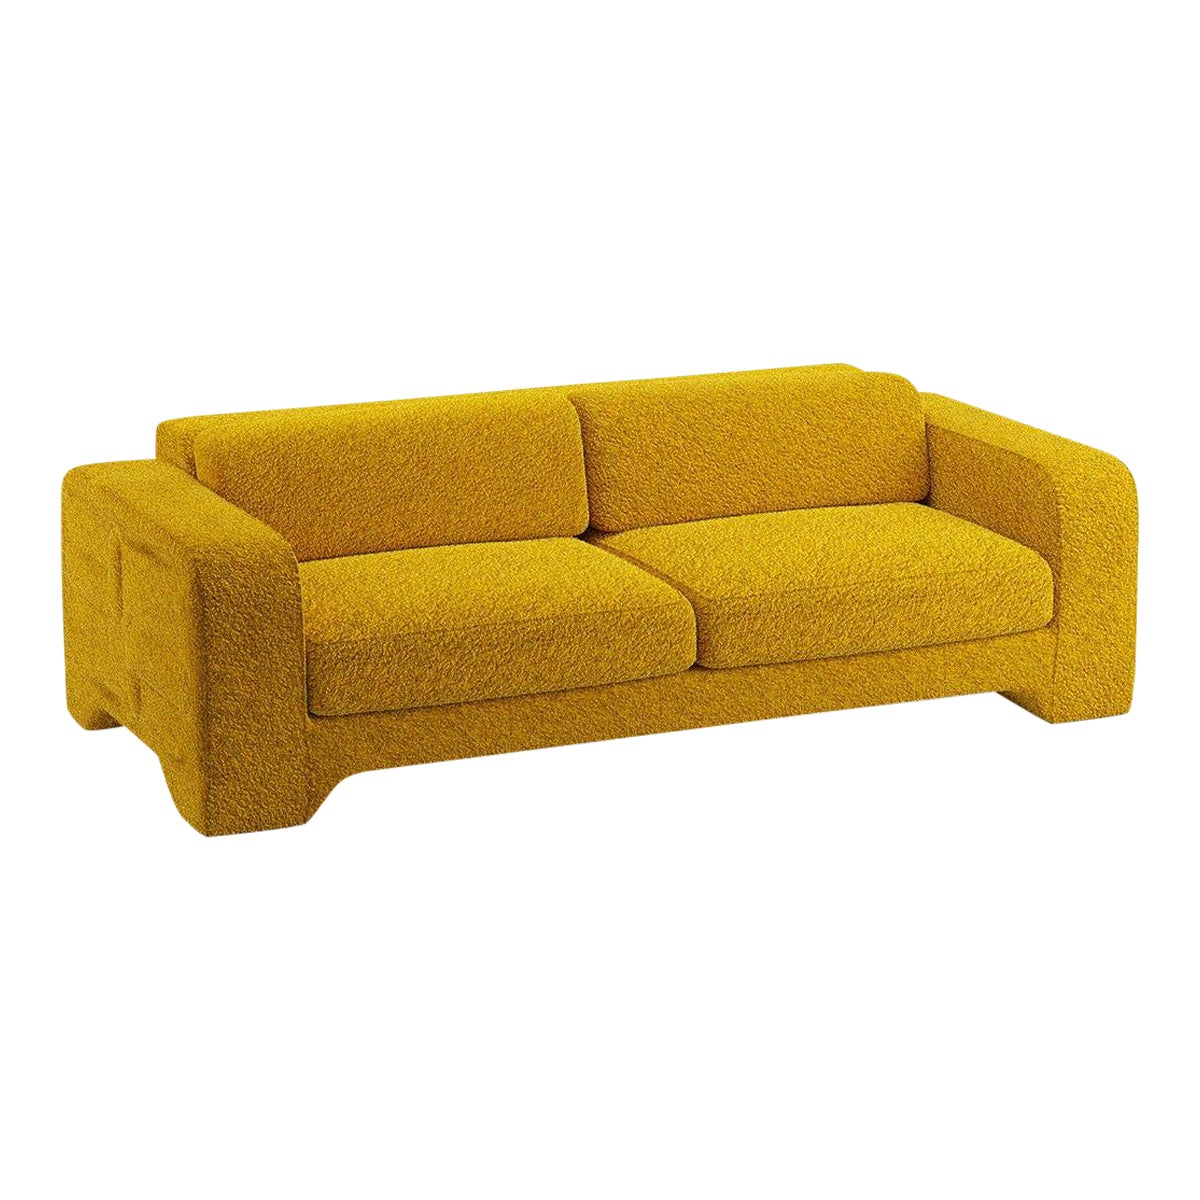 Popus Editions Giovanna 4 Seater Sofa in Amber Athena Loop Yarn Fabric For Sale